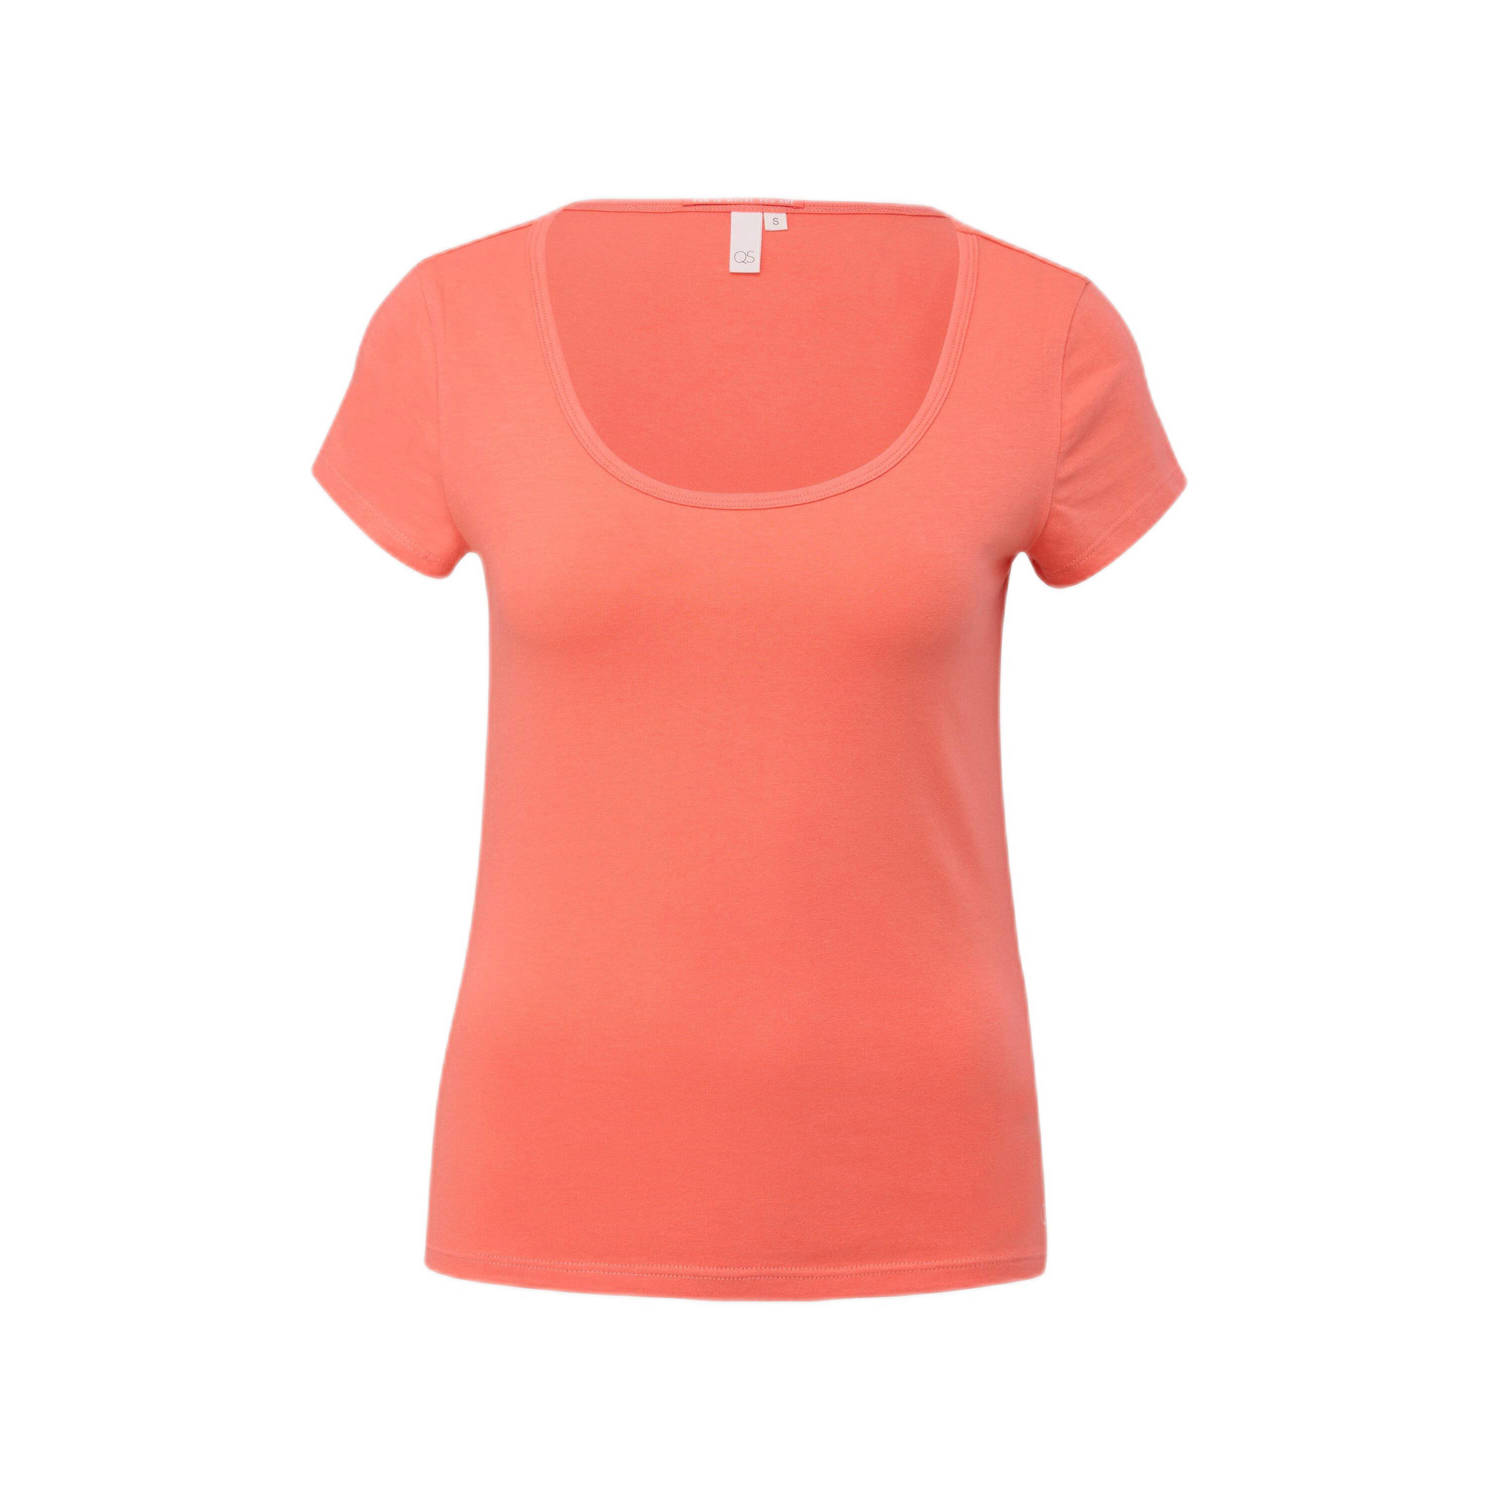 Q S by s.Oliver T-shirt koraalrood